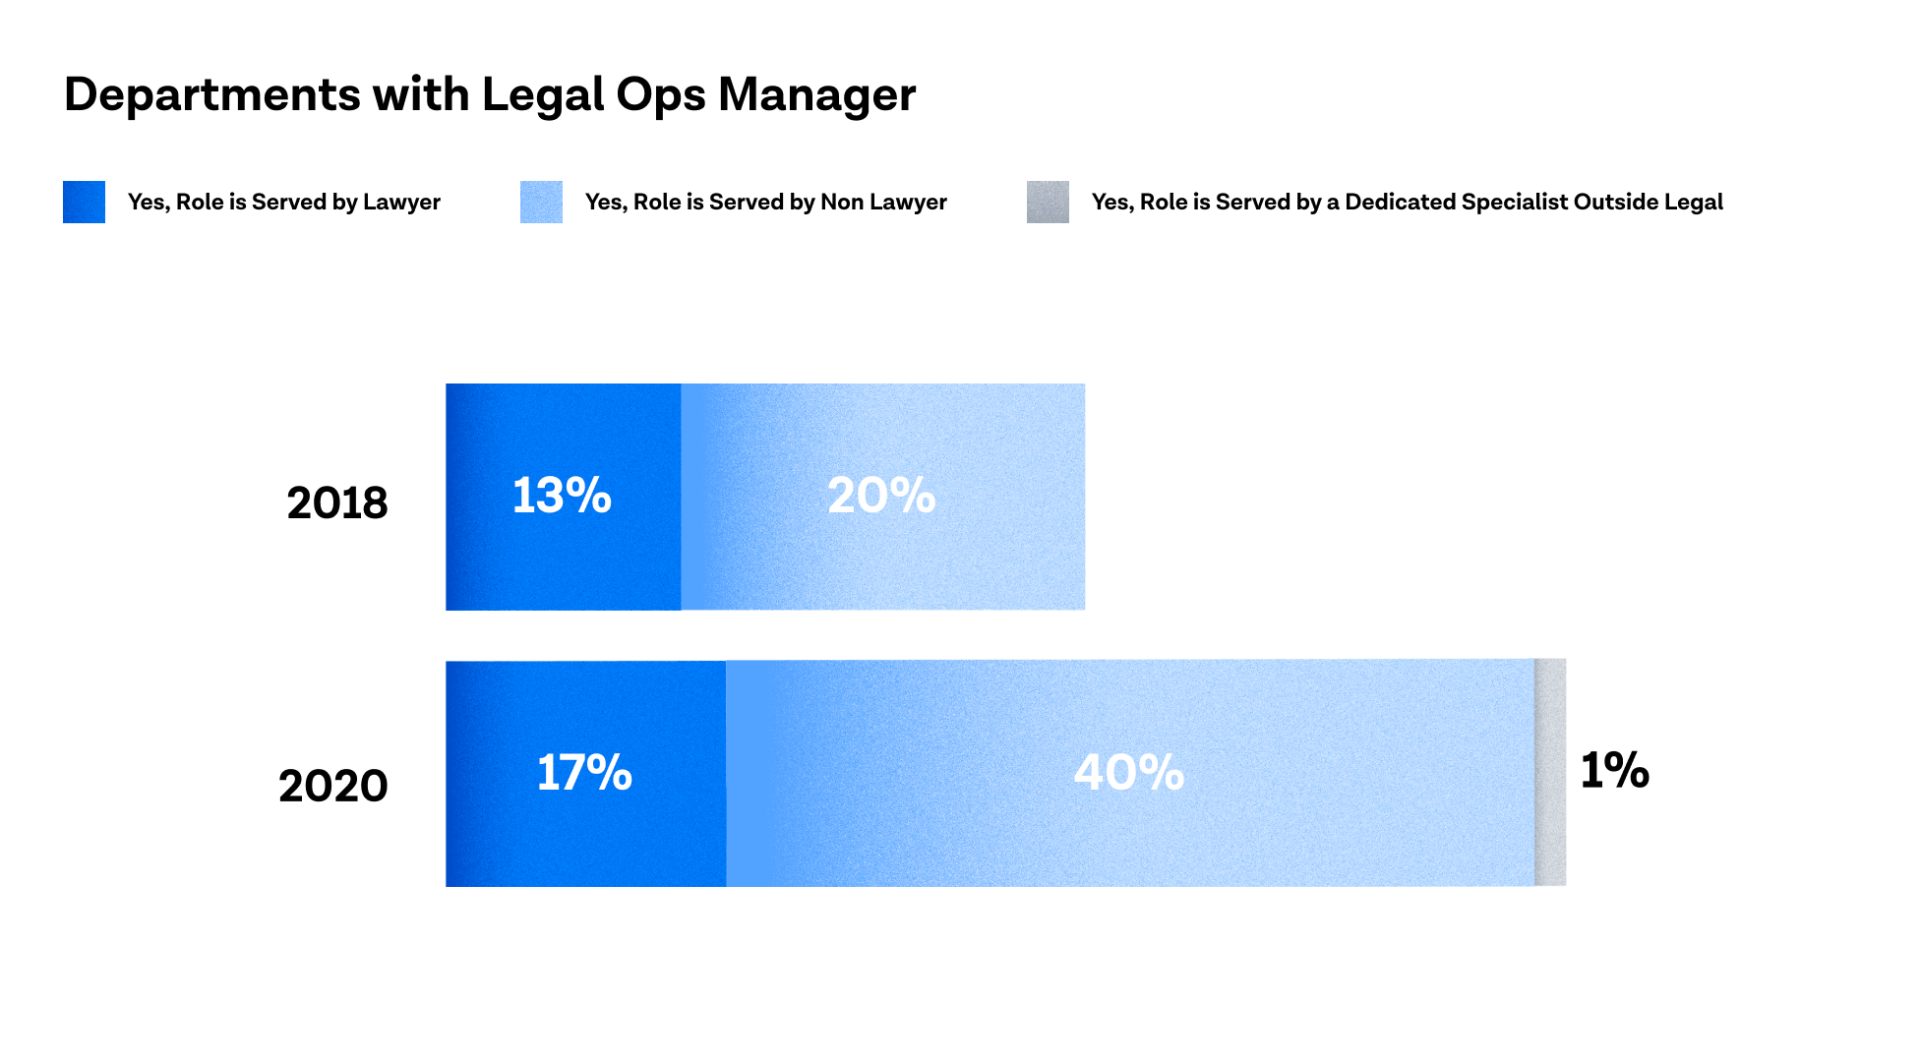 Legal Ops Manager survey